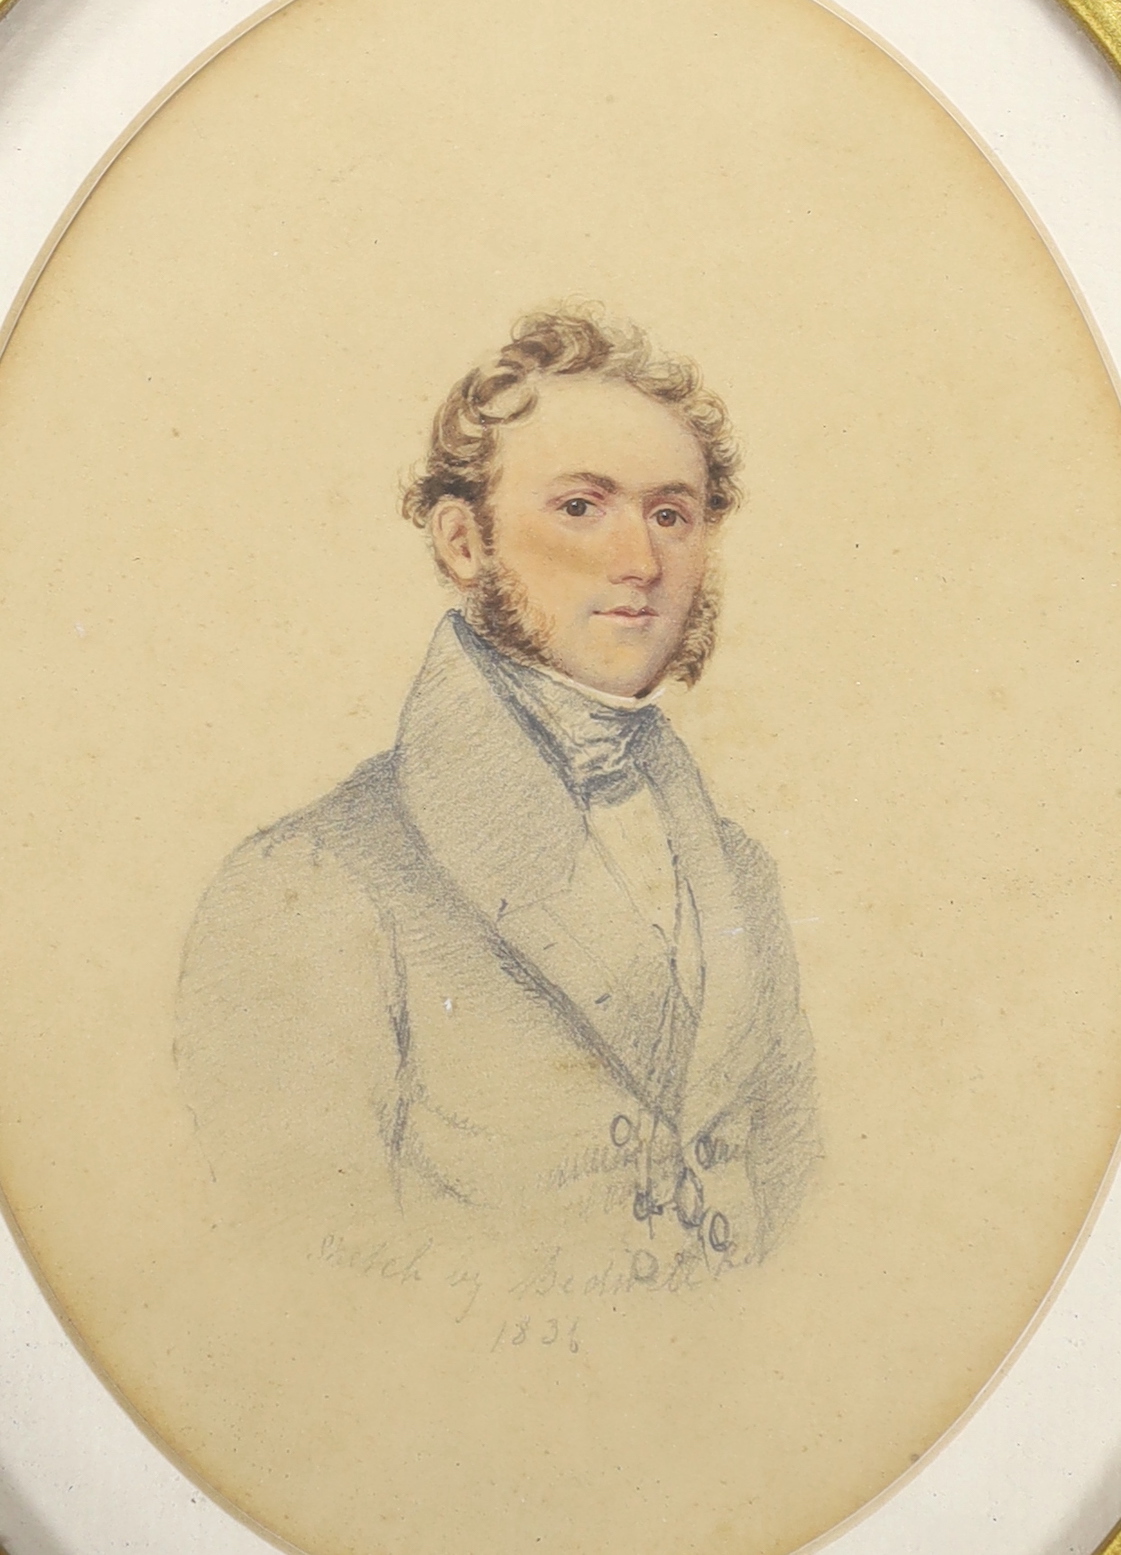 Early 19th century English School, pencil and watercolour, Portrait of a gentleman, indistinctly inscribed and dated 1831, together with a 19th century heightened watercolour, River landscape with boat, ornate gilt frame